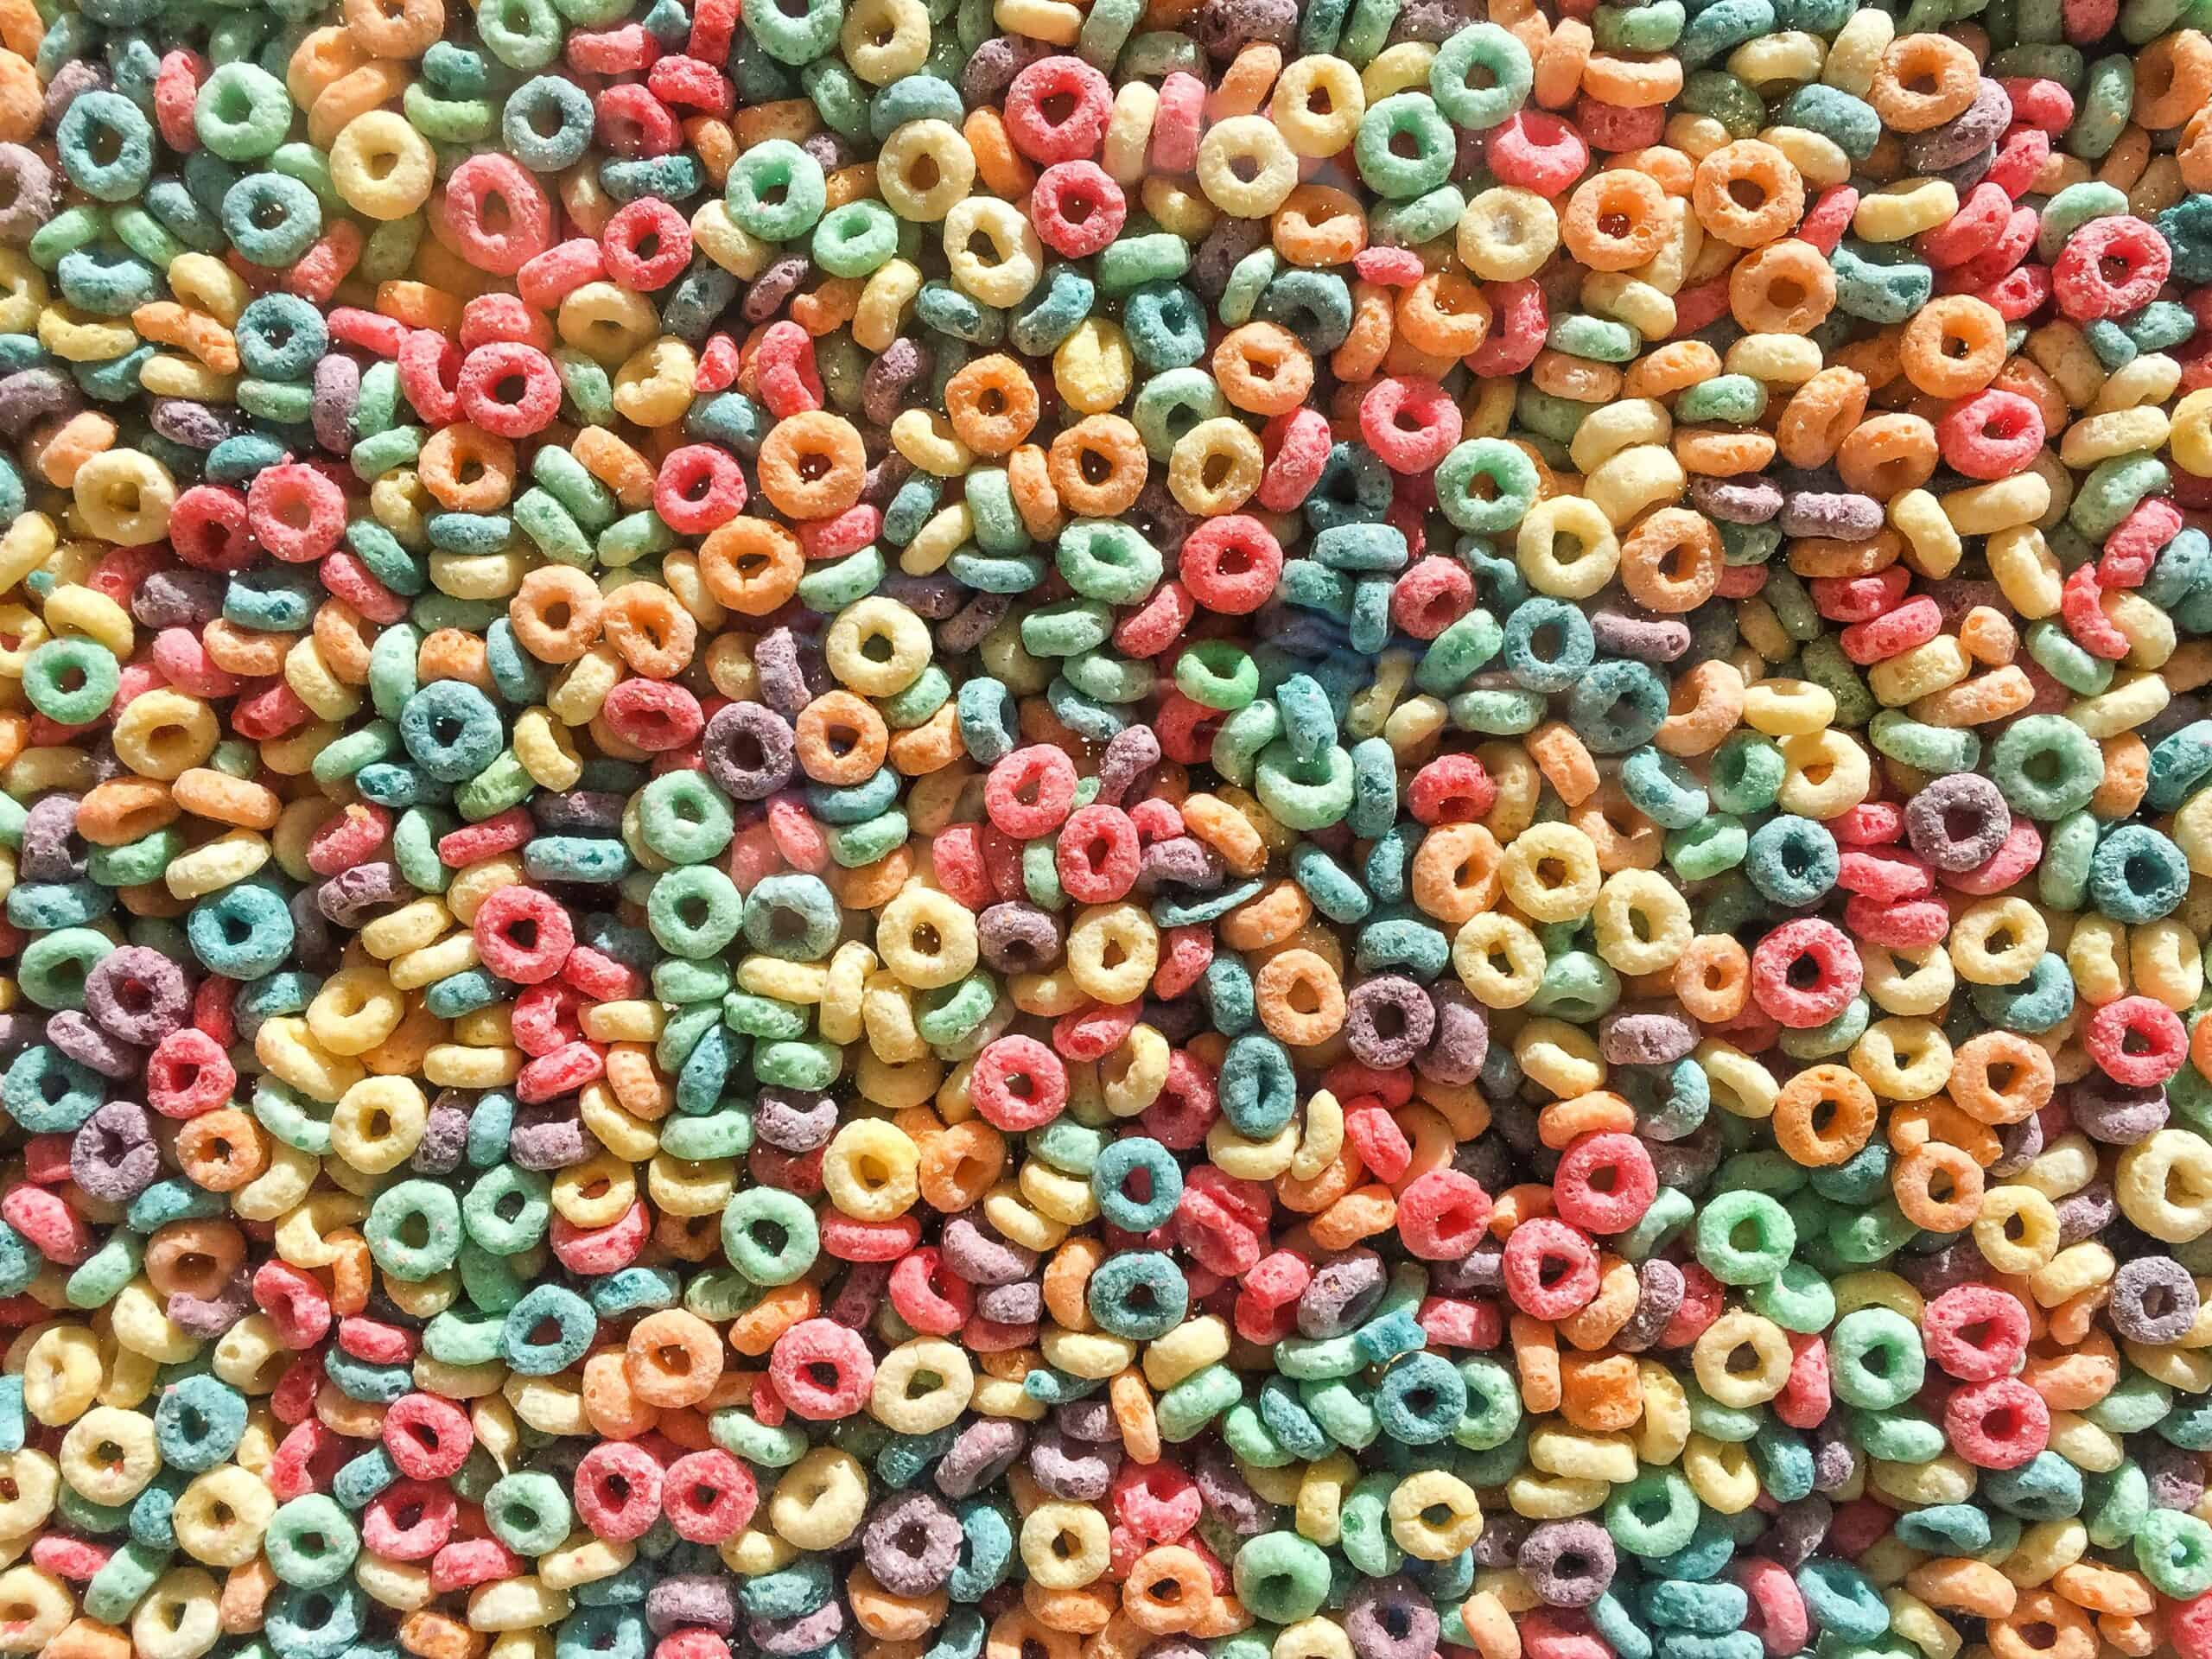 3/7 - National Cereal Day